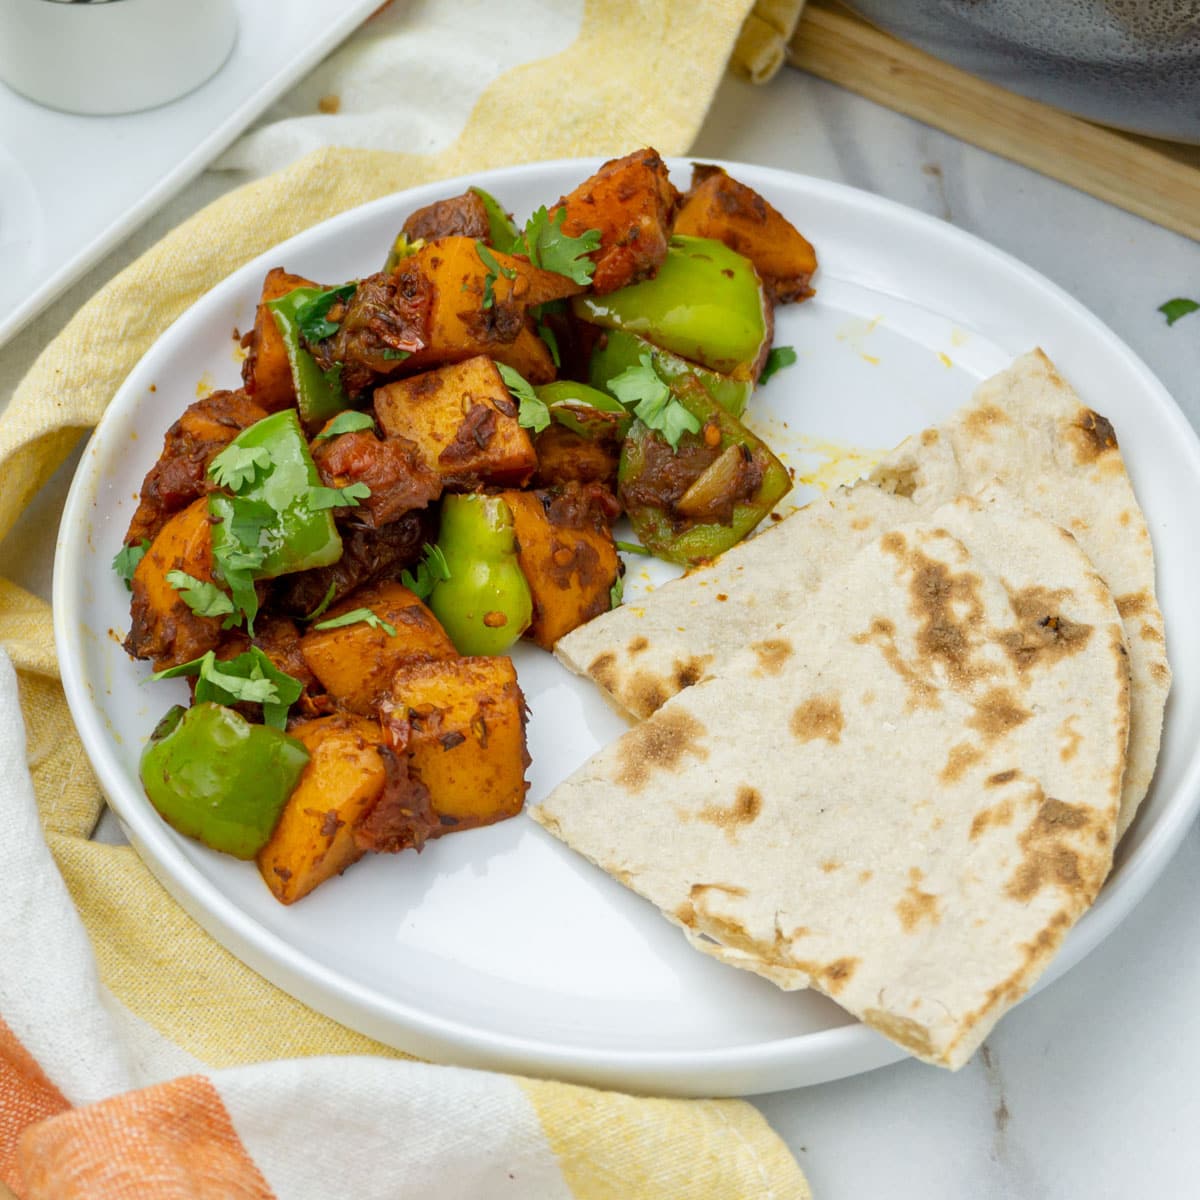 Aromatic Aloo Simla Mirch dish with tender potatoes and colorful bell peppers in a plate